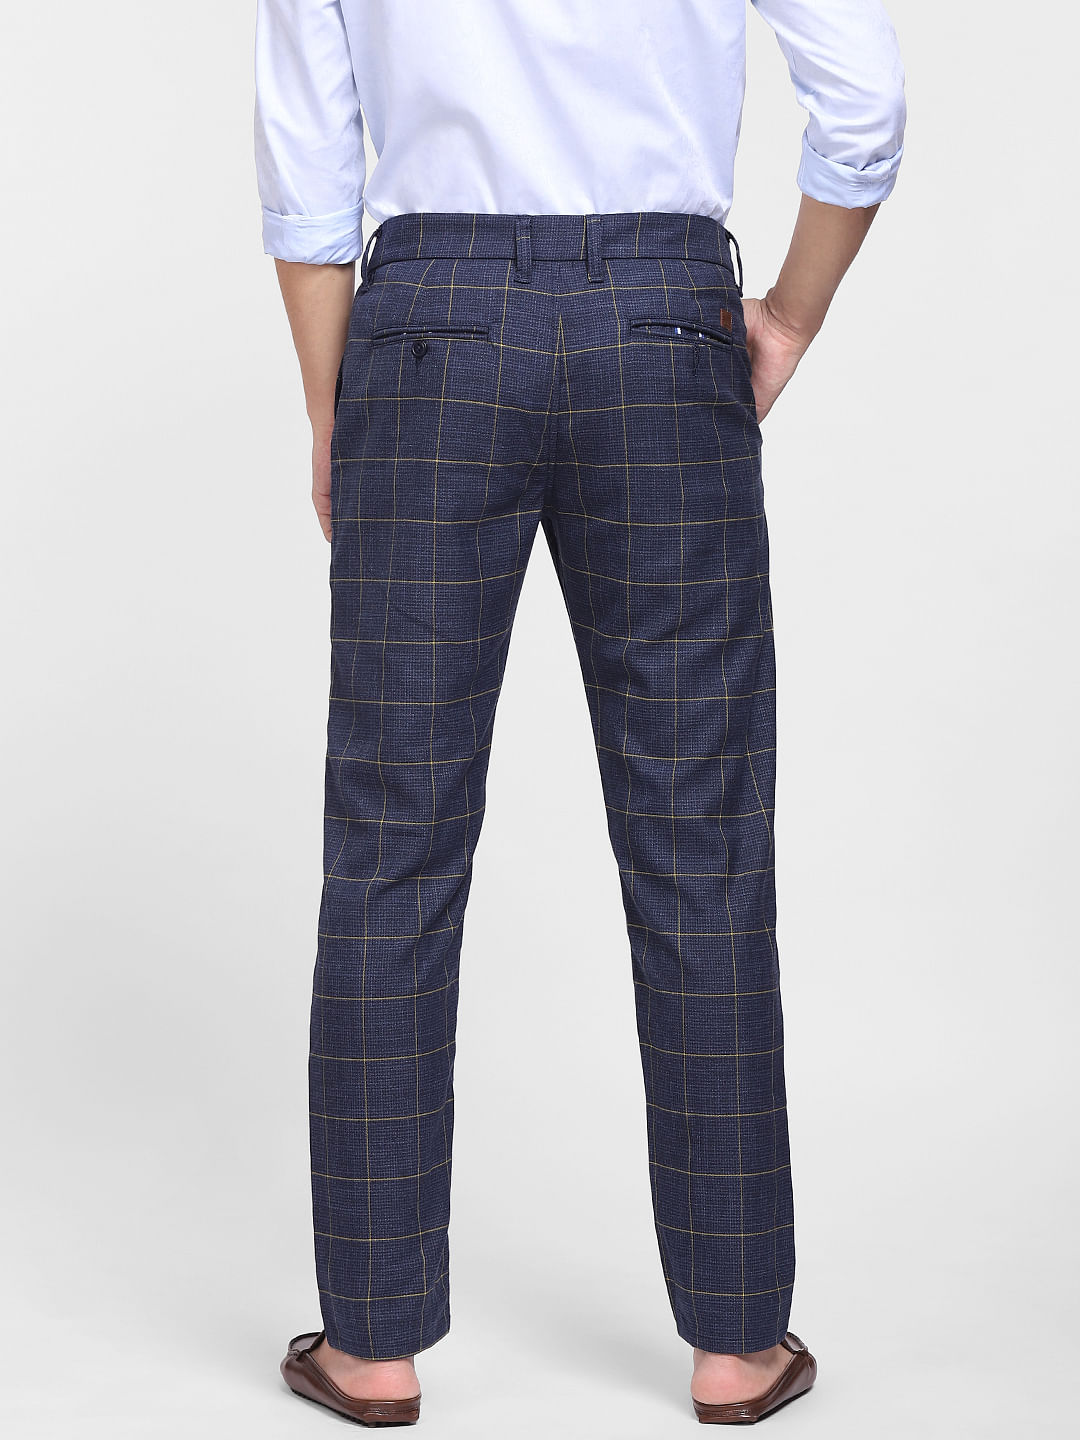 Check Formal Trousers In Navy B95 Crash